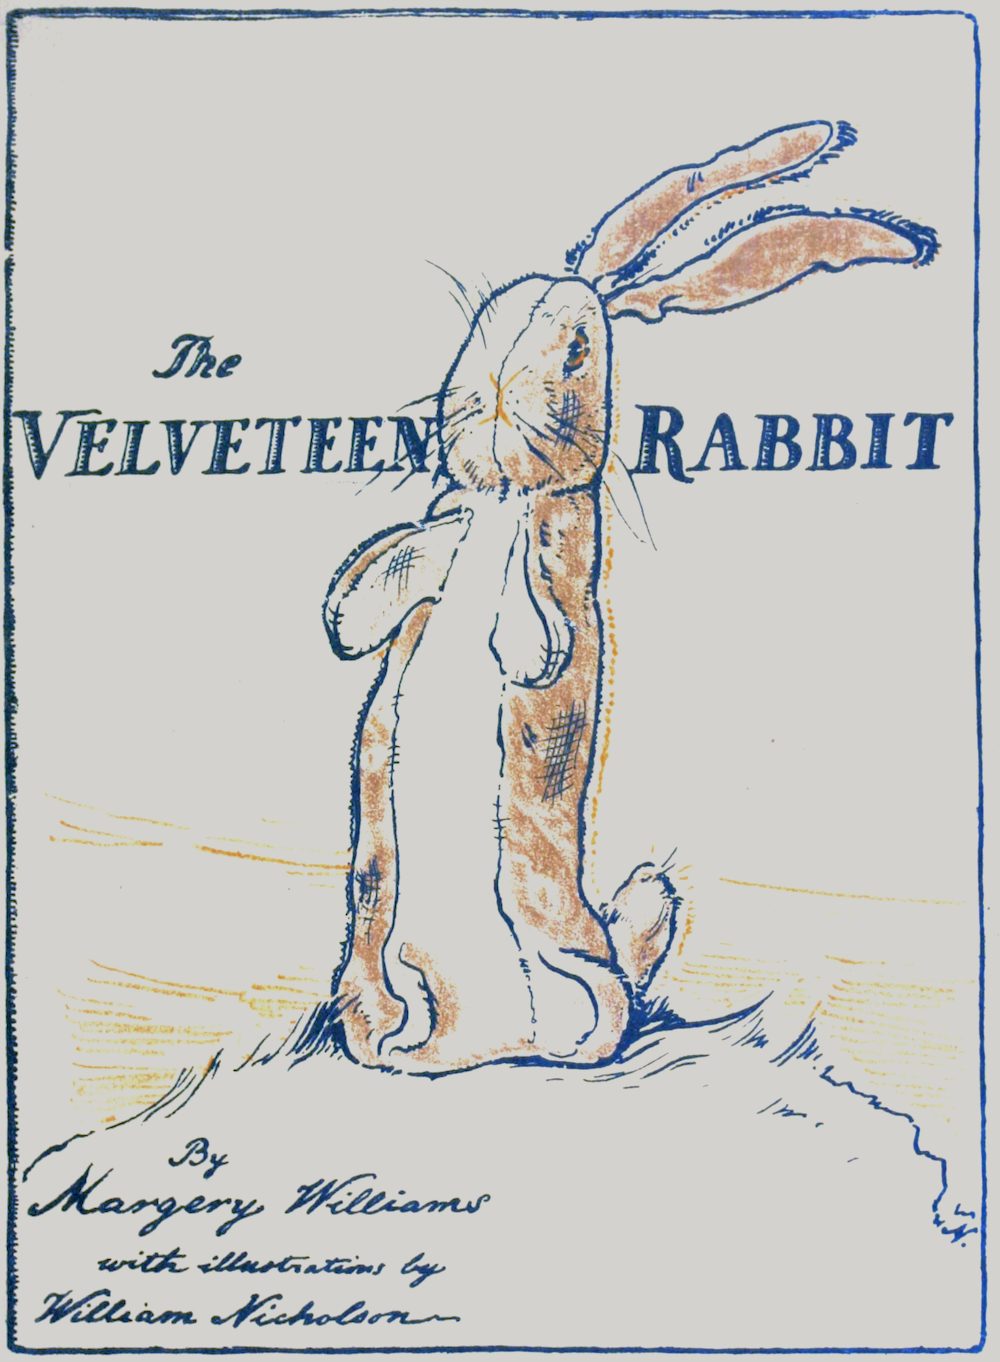 The cover of The Velveteen Rabbit by Glenn Ringtved and Charlotte Pardi, featuring a stuffed rabbit.